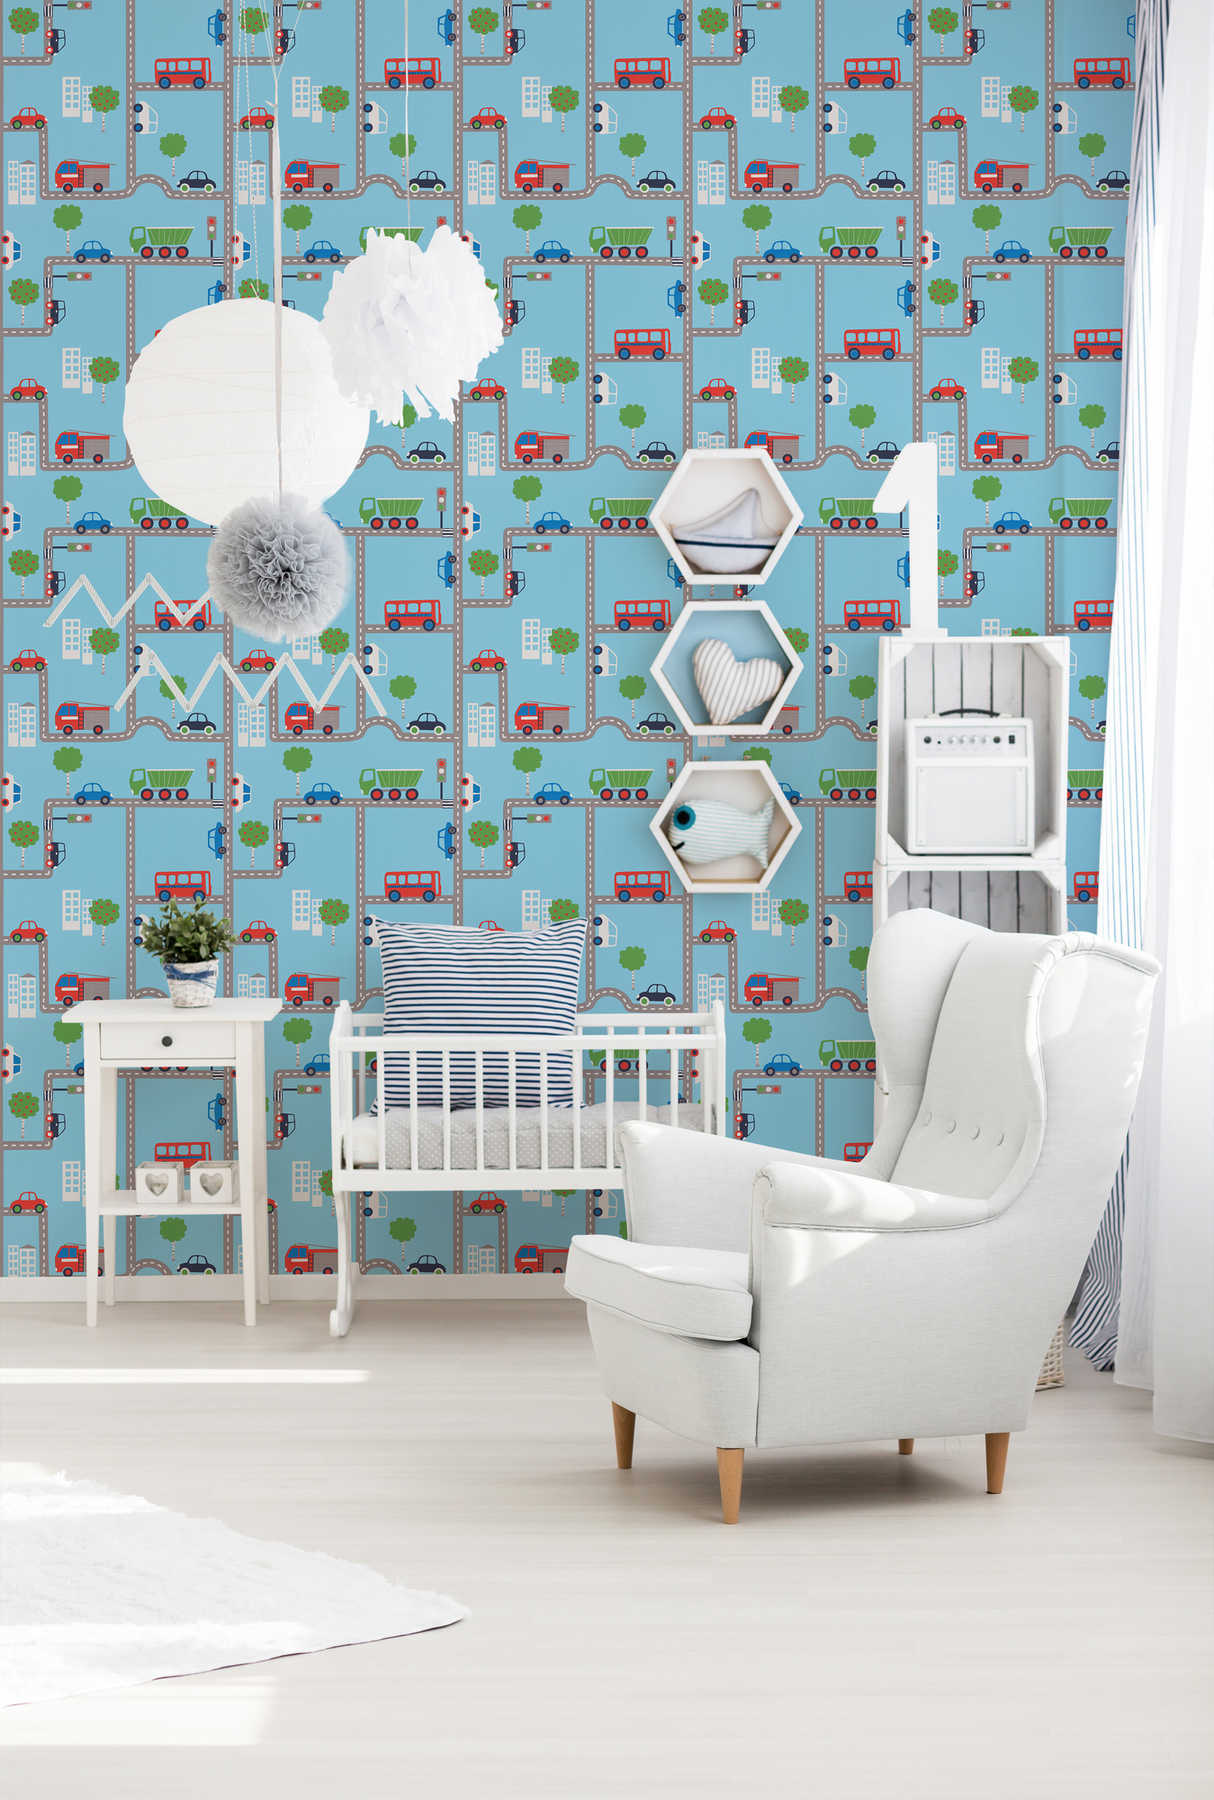             Nursery paper wallpaper with cars & roads in cartoon style - Colorful, Blue
        